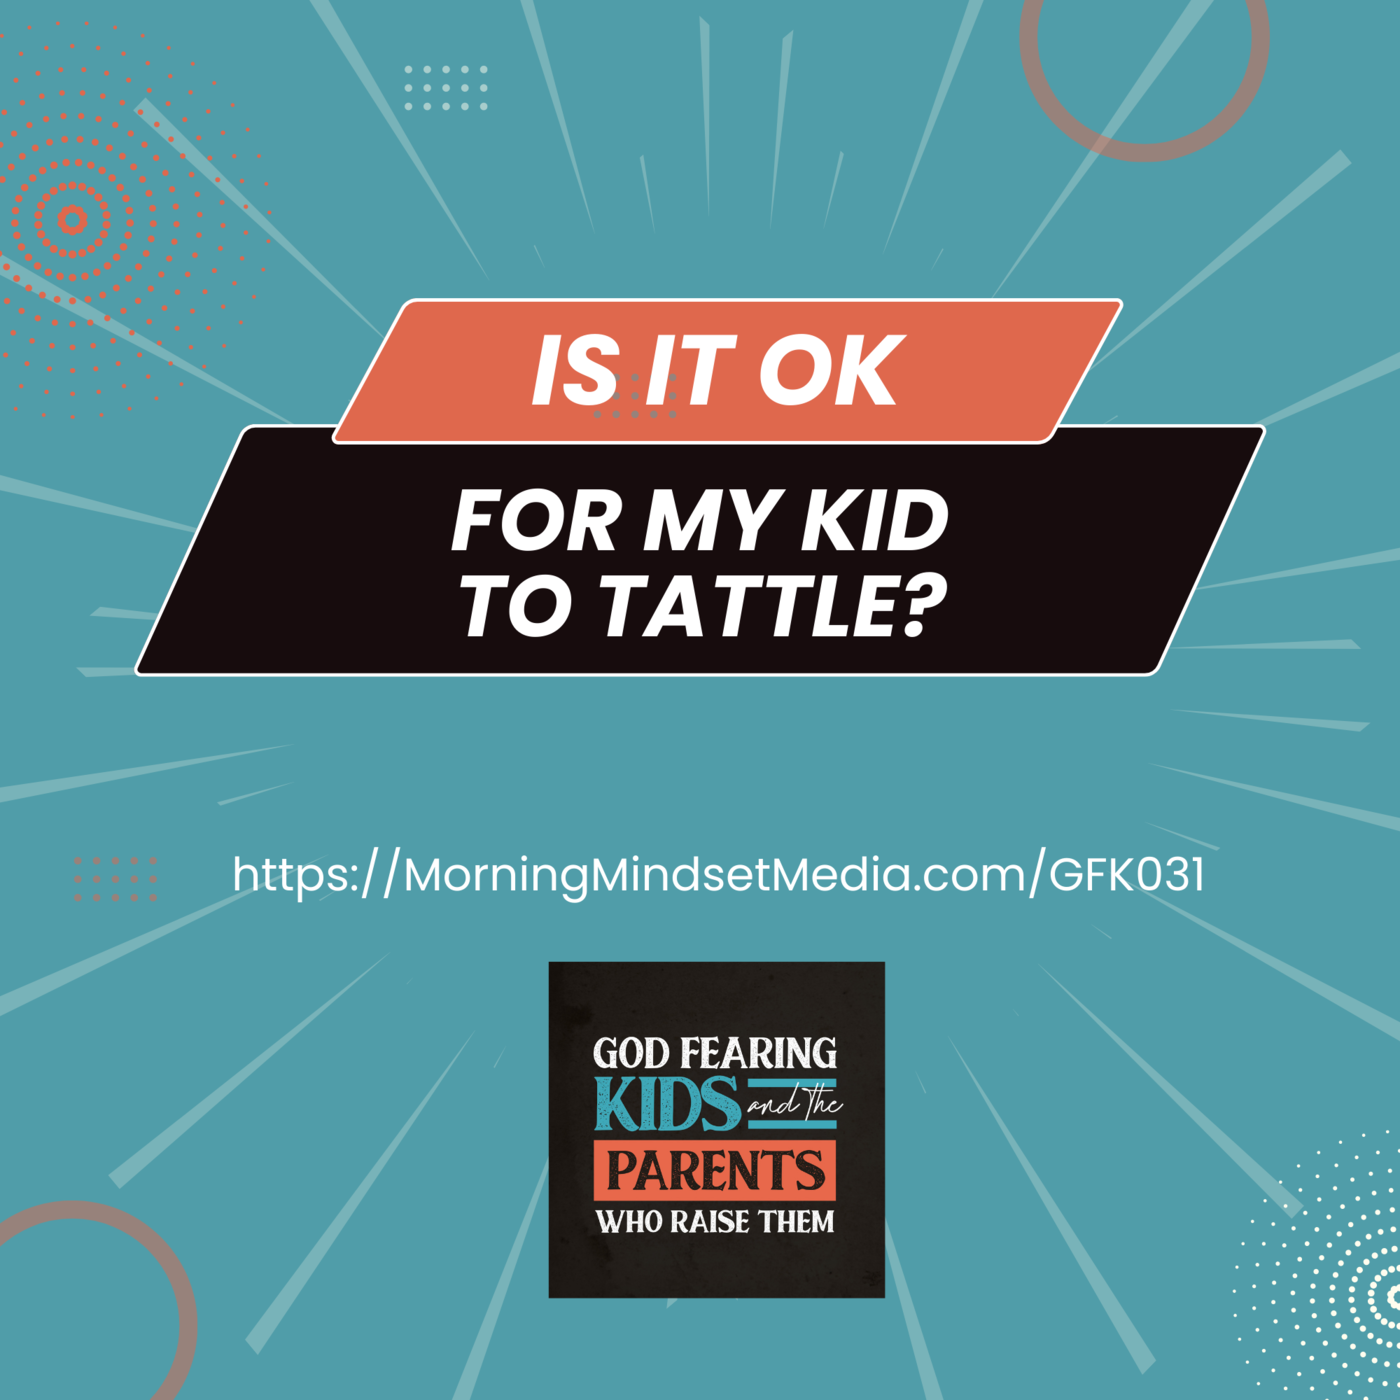 031: Is it OK for my kid to tattle?